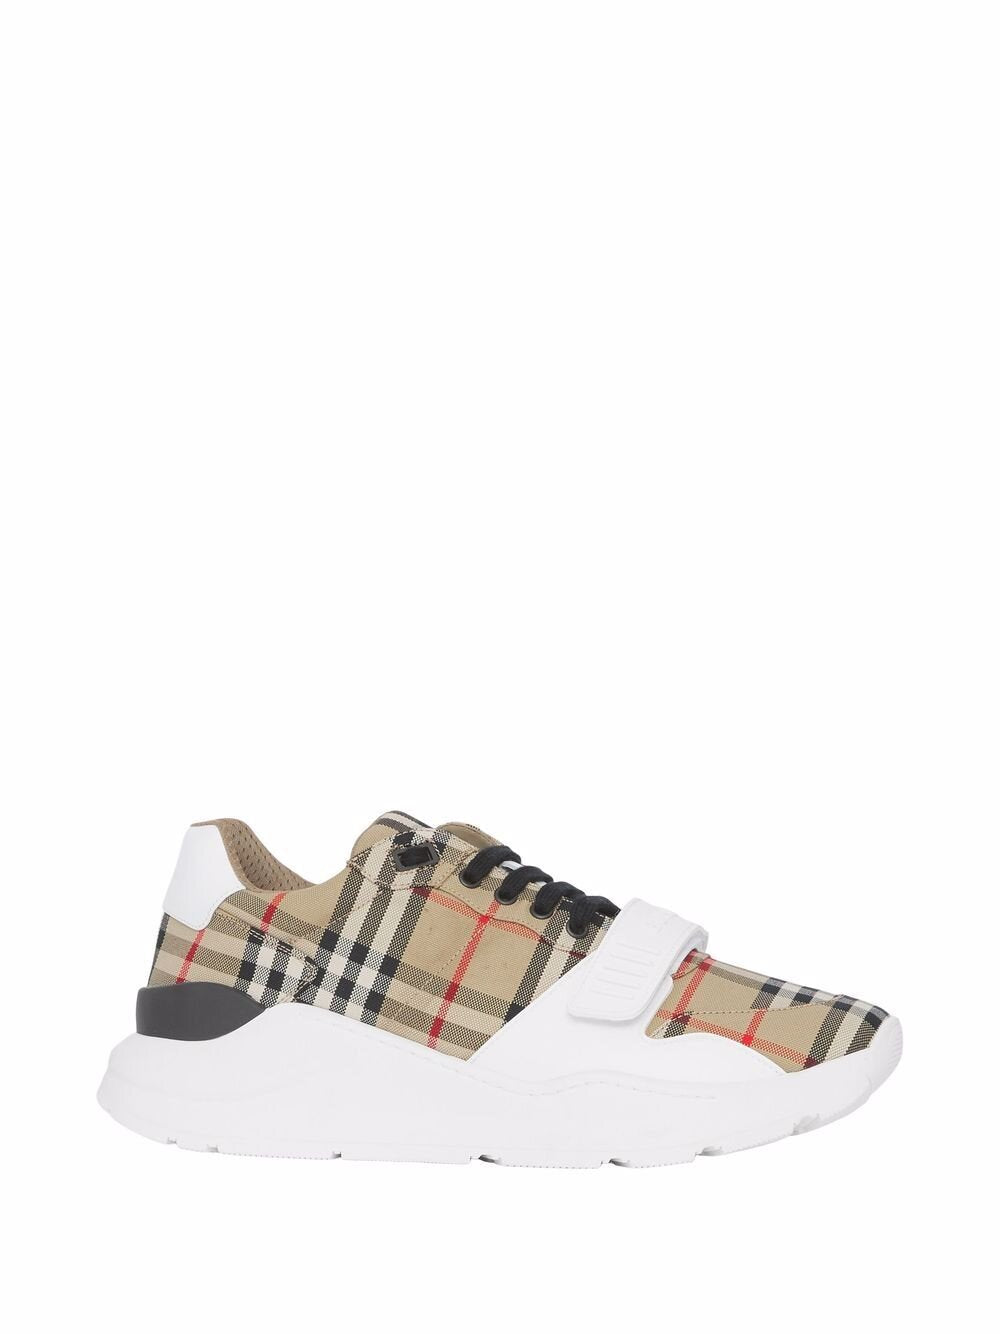 Burberry Regis Low-top Trainers in Beige & White